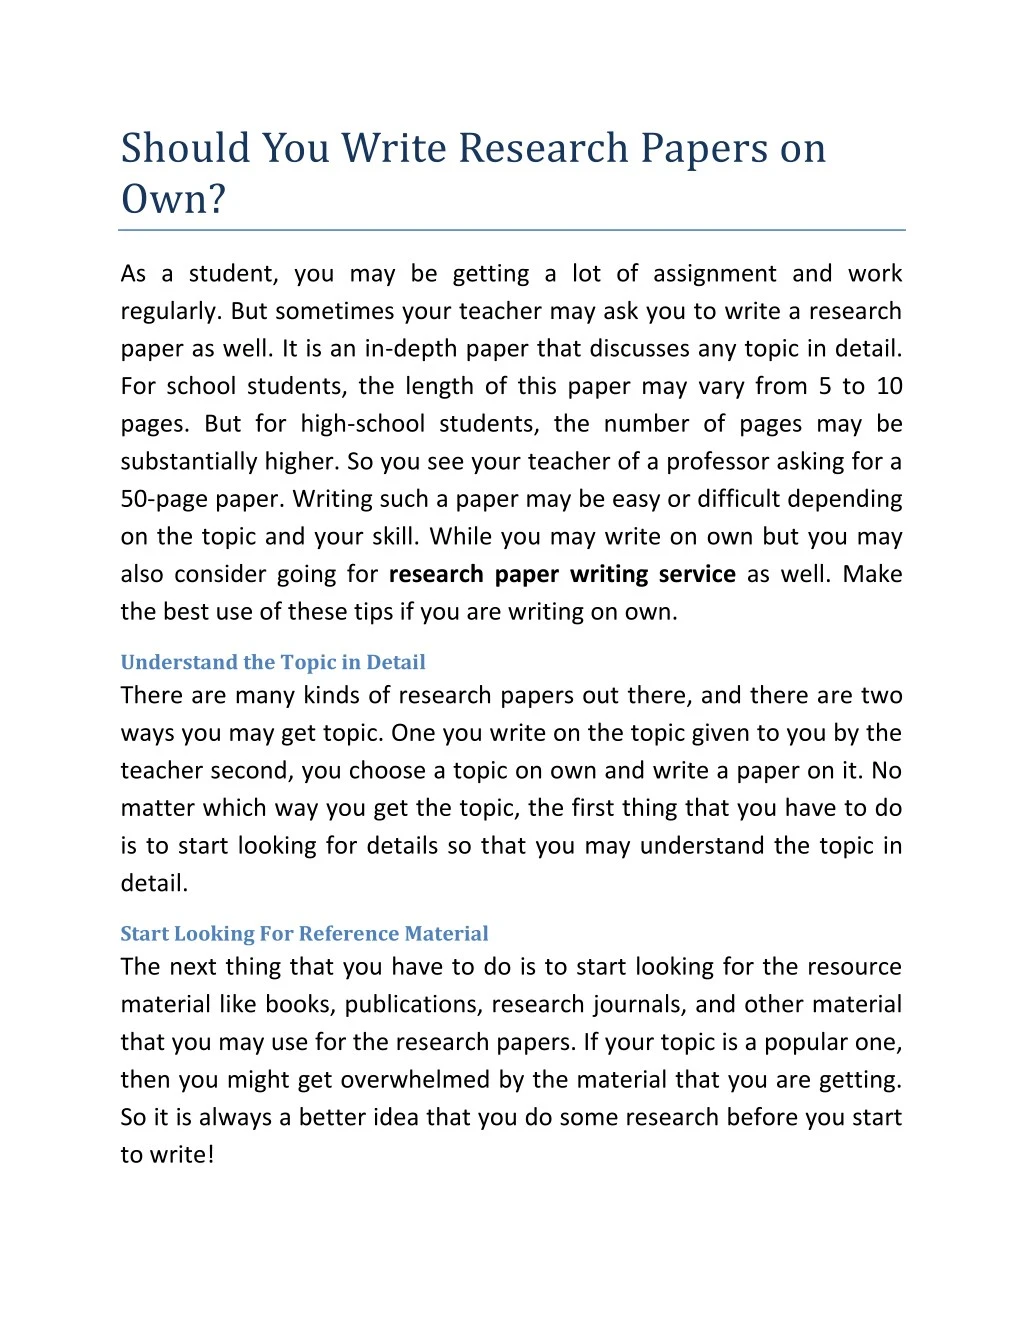 should you write research papers on own